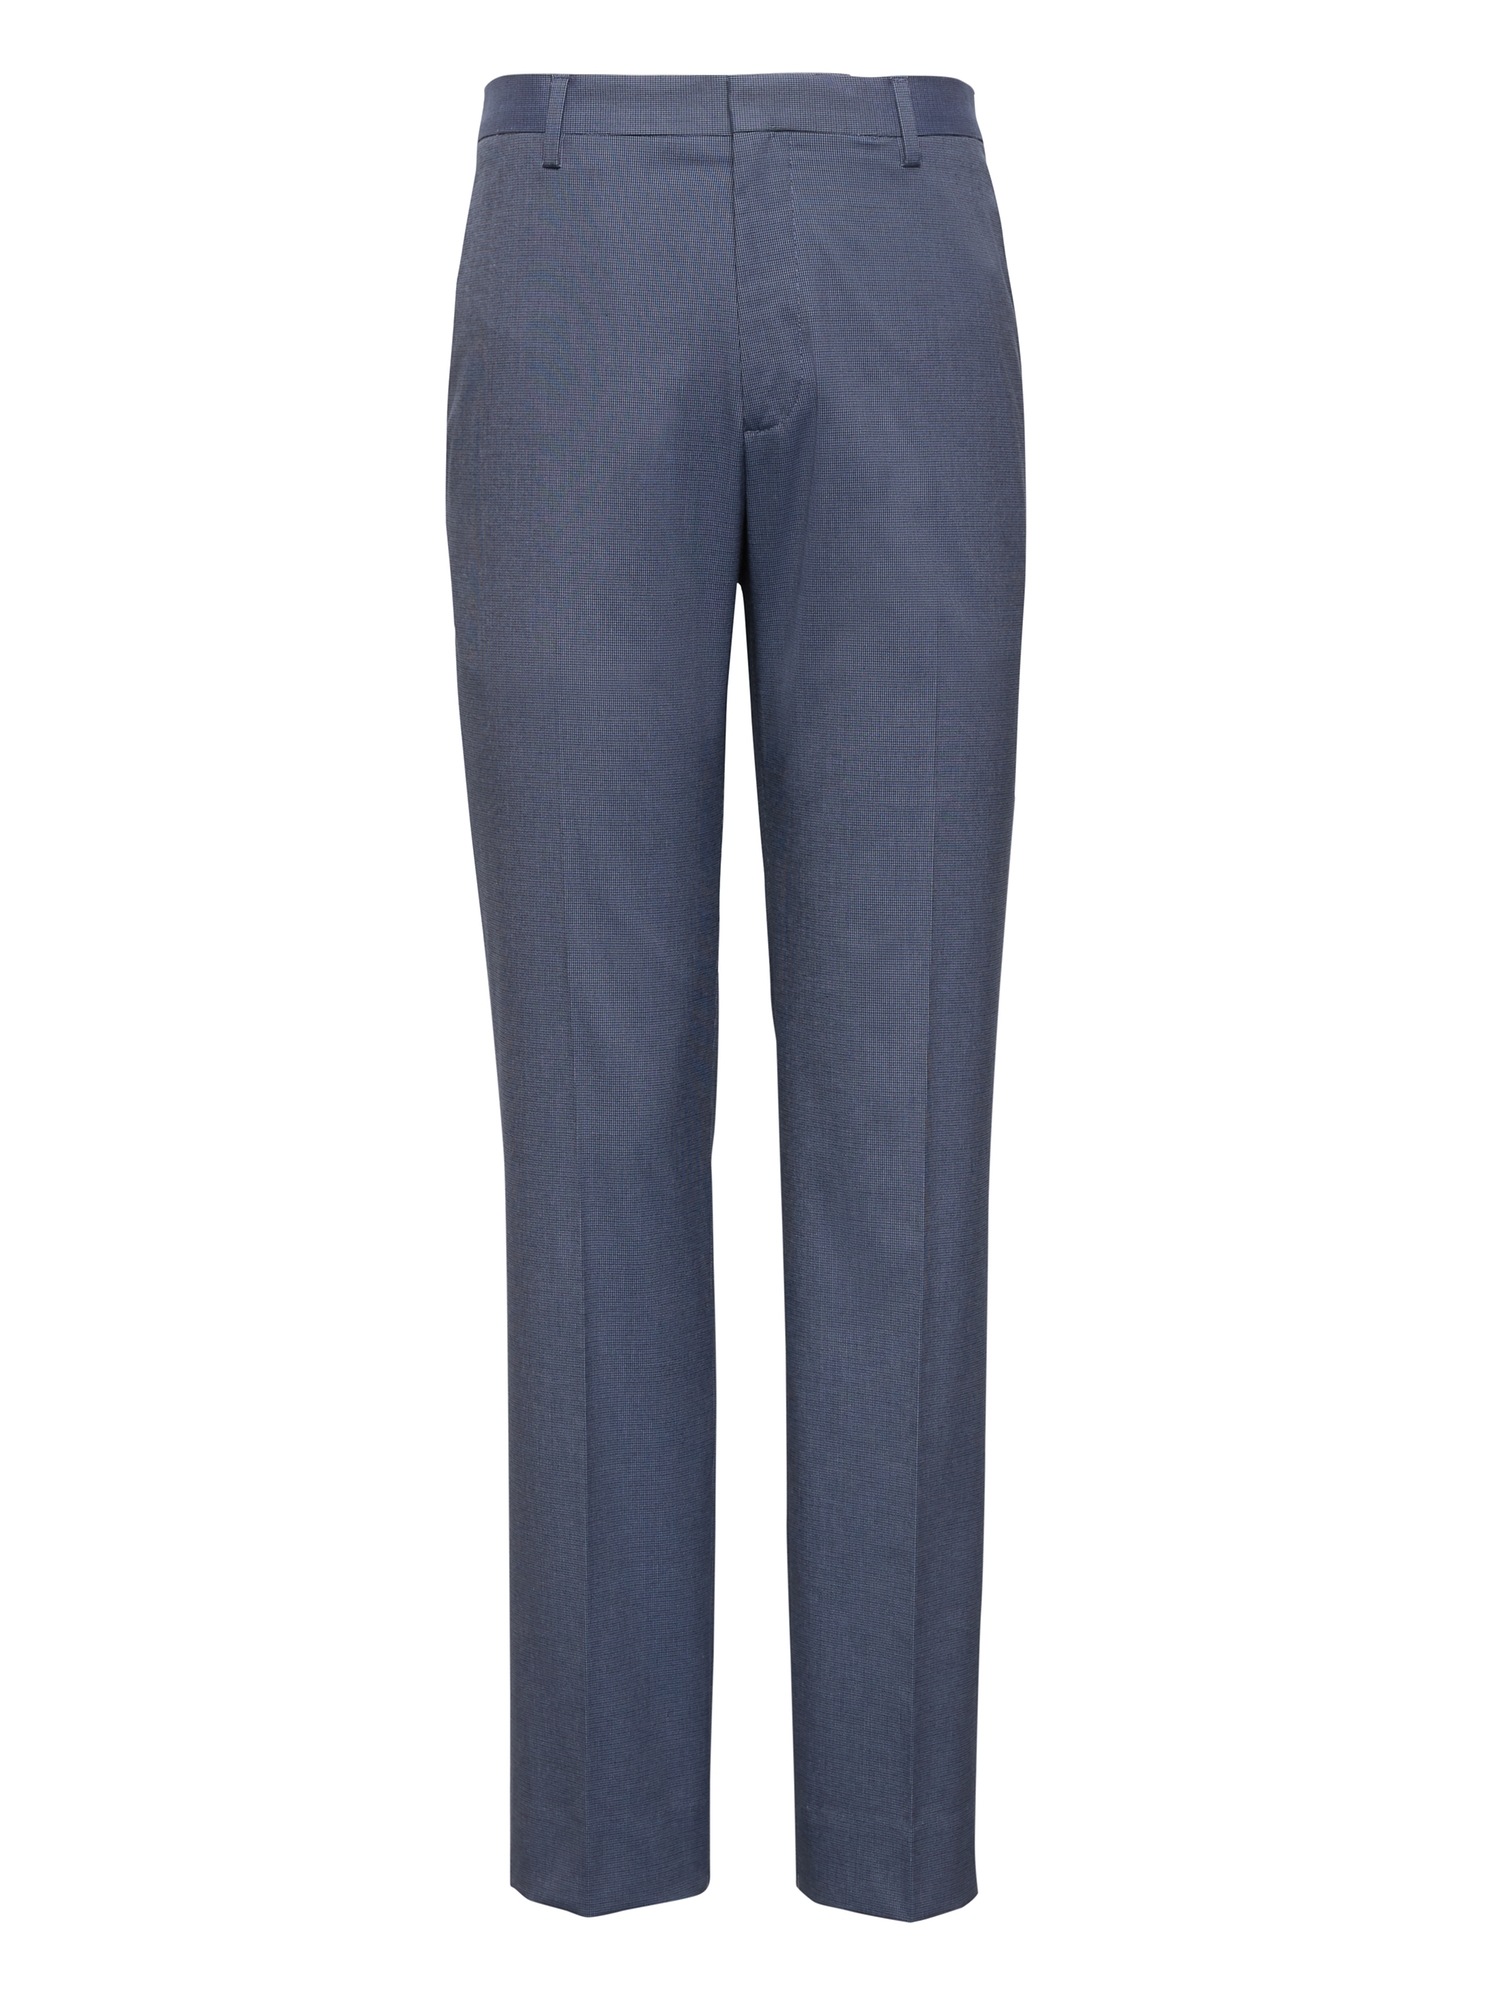 Athletic Tapered Non-Iron Stretch Cotton Houndstooth Pant